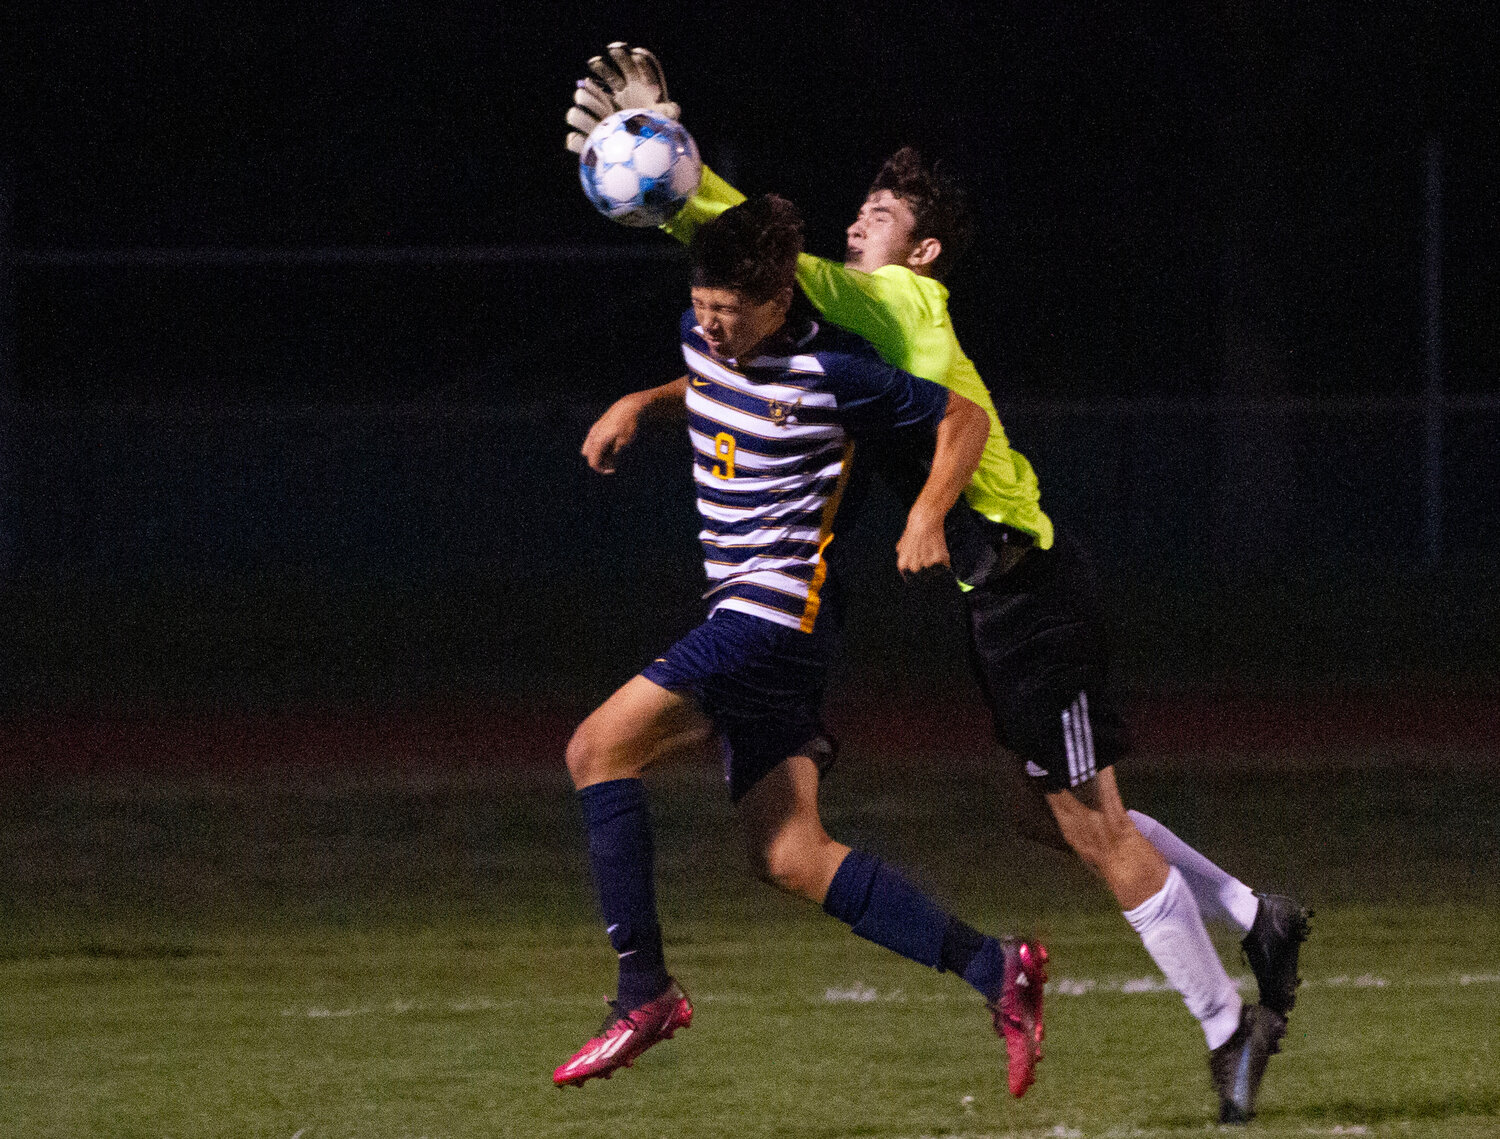 The Eagles’ George Zukhov fights for a direct kick with Huskies’ goal keeper Evan Garies near the Huskies’ goal.